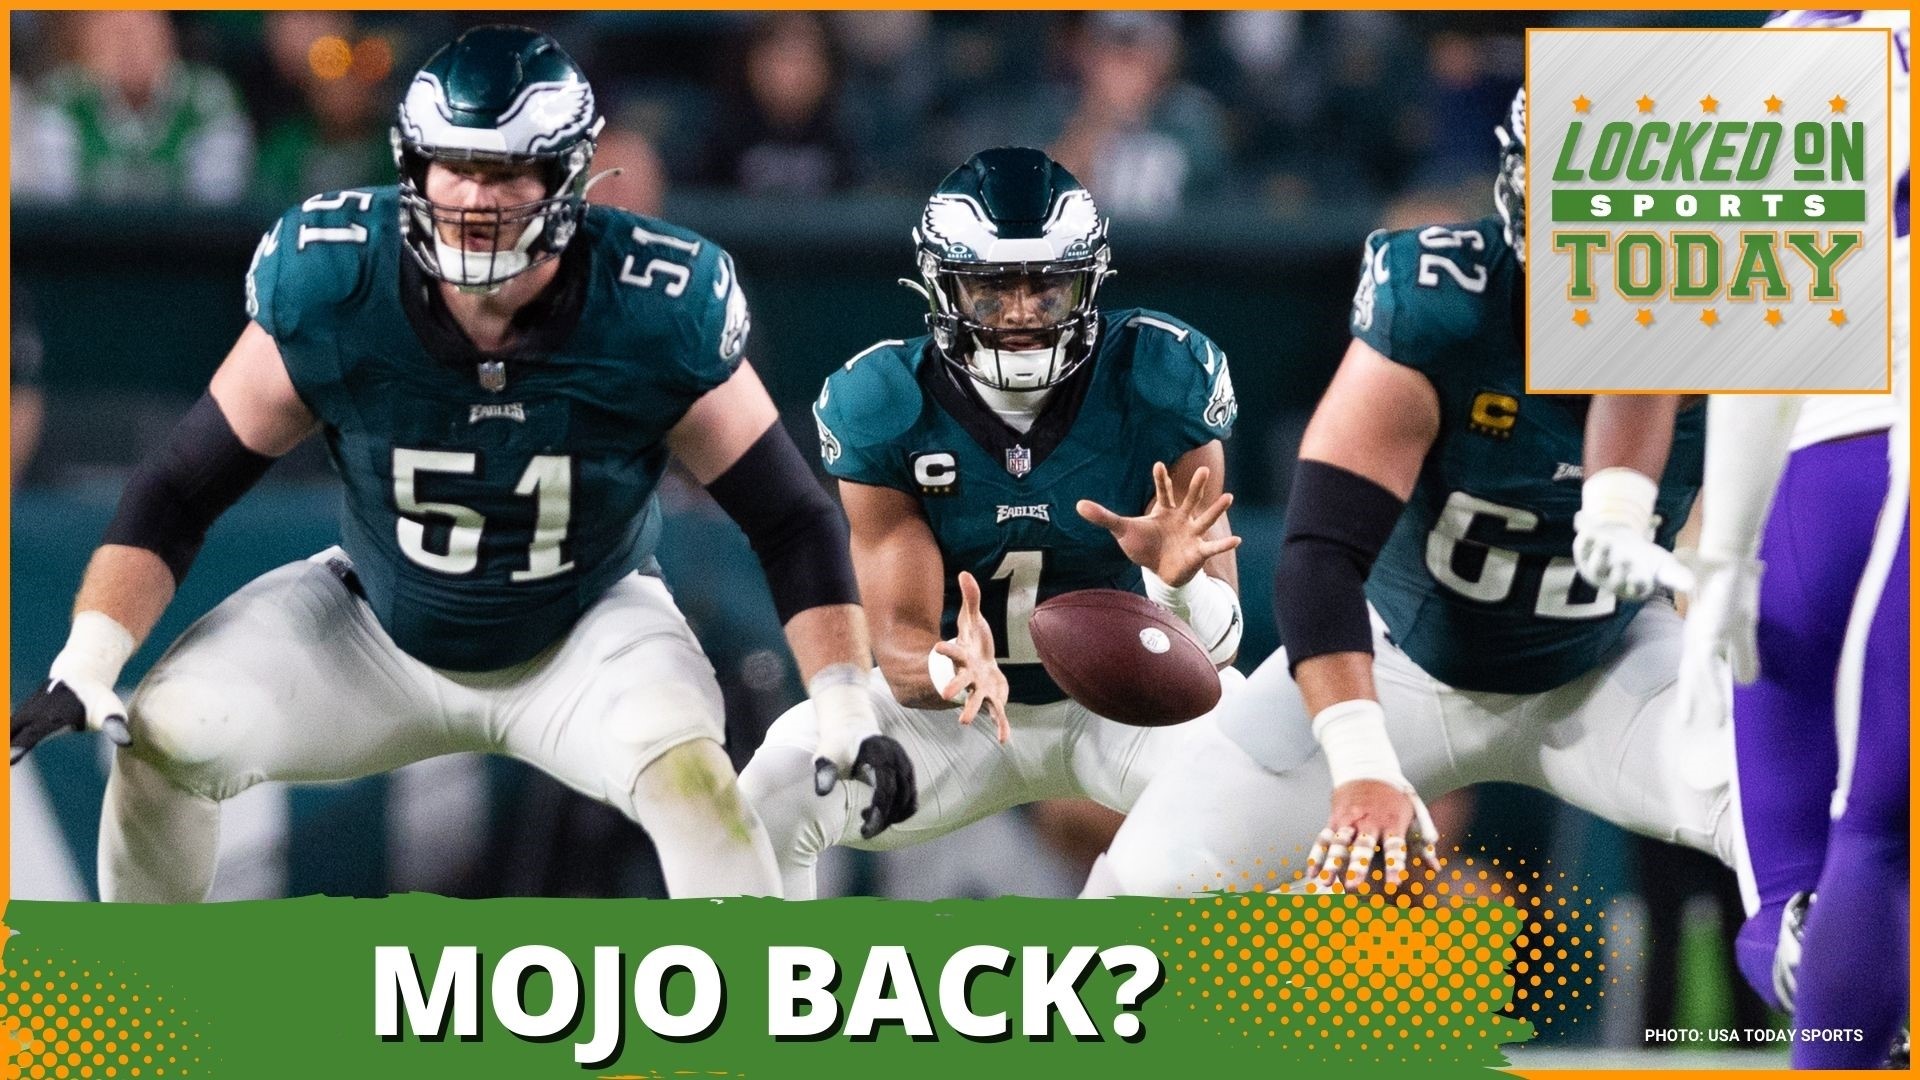 Discussing the day's top sports stories from the Eagles get their mojo back against the Vikings to the Ravens already dealing with injuries.